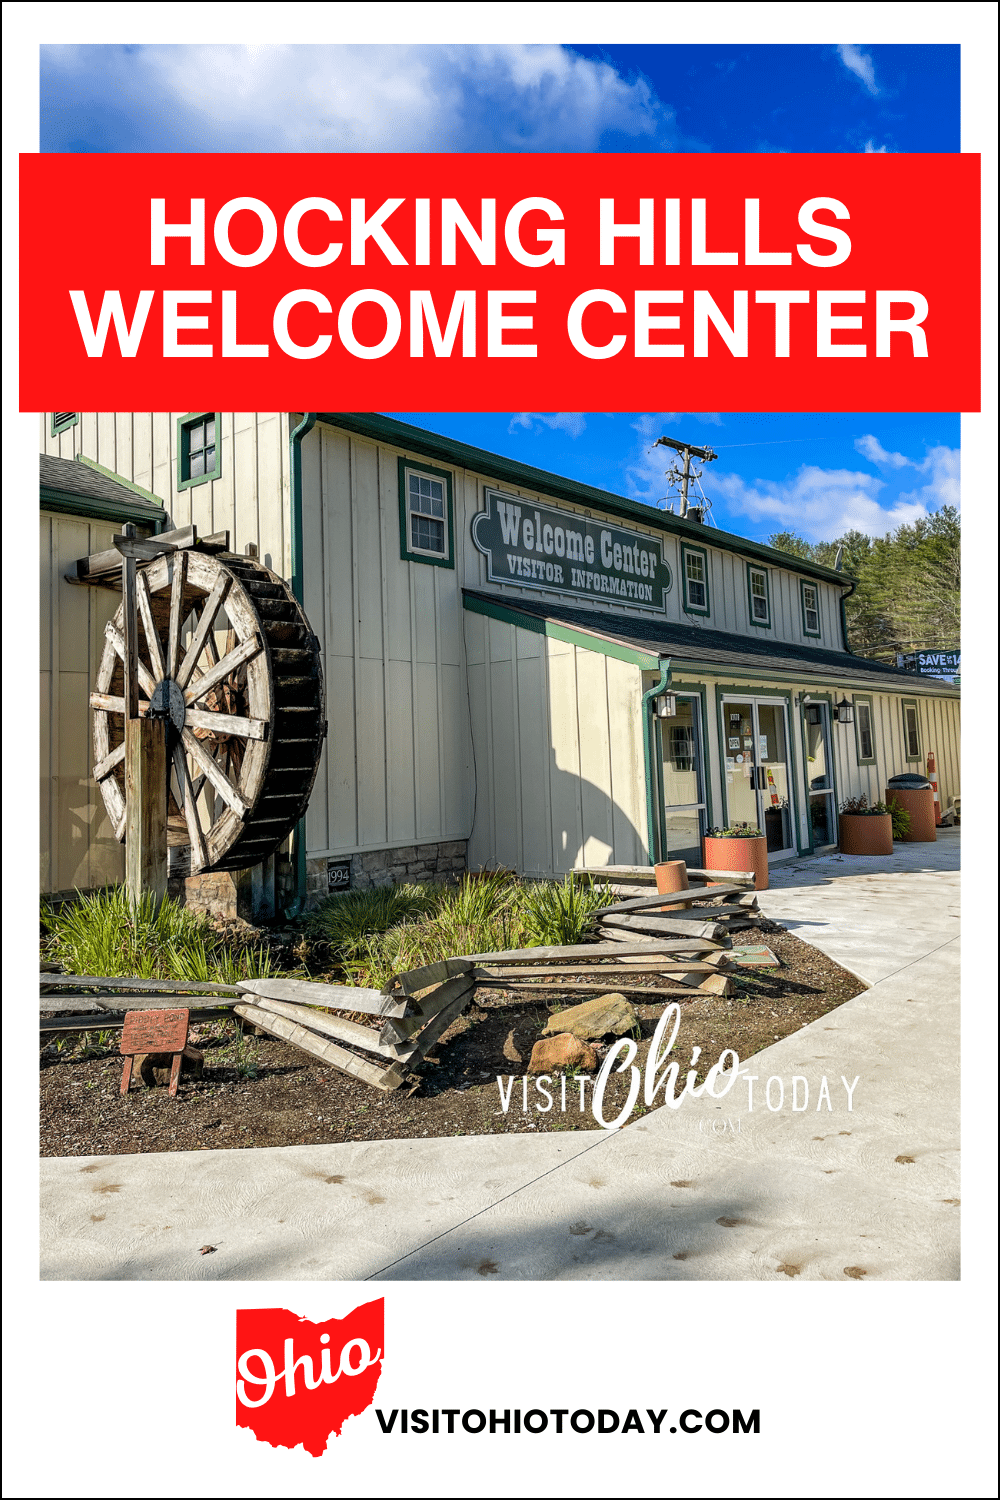 Hocking Hills Welcome Center in Logan is the largest of three welcome centers operated by the Hocking Hills Tourism Association.